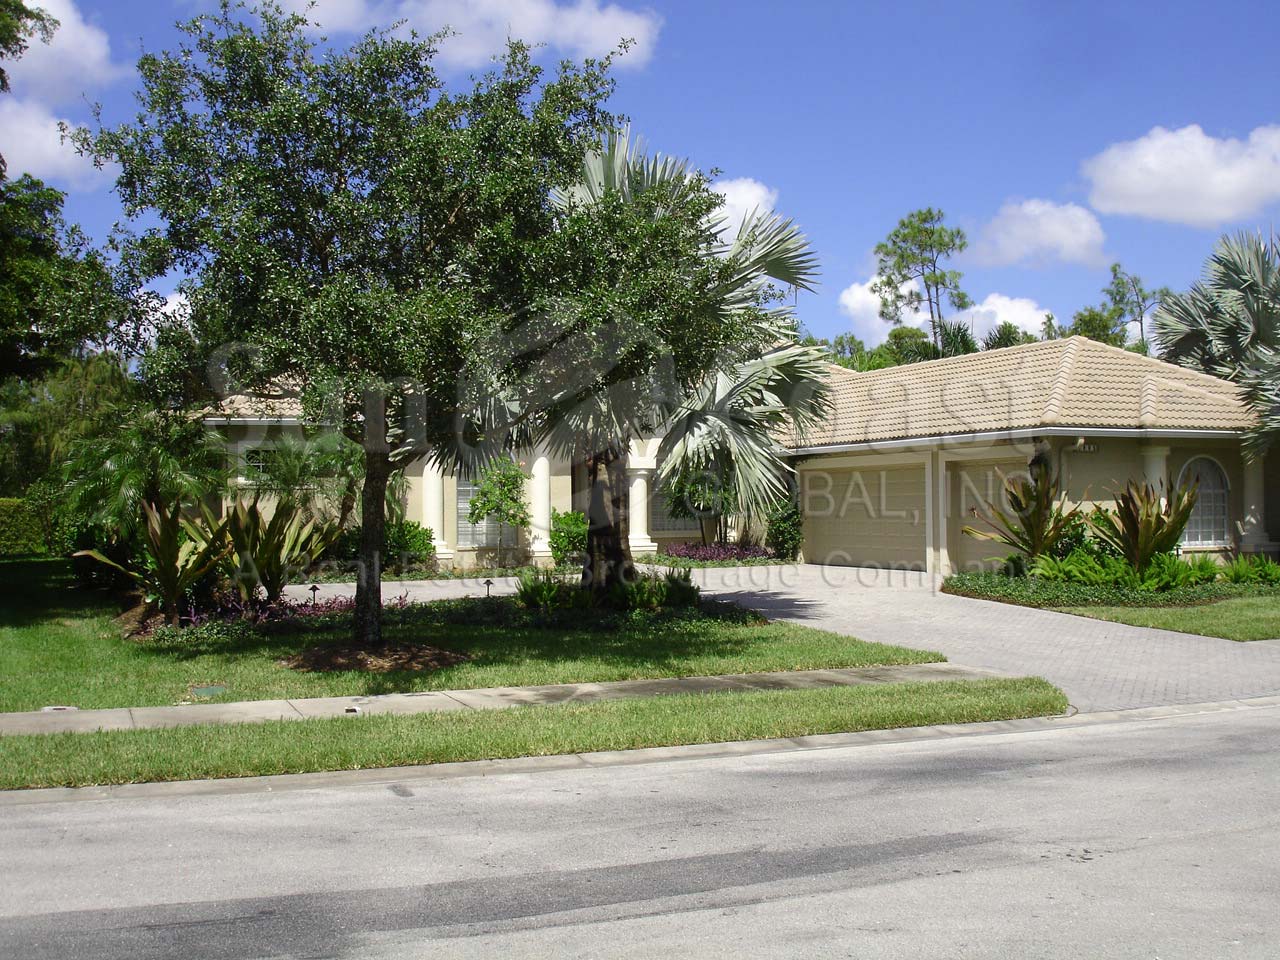 Wax Myrtle Run is a non gated community within Cedar Hammock comprised of single family homes with tile roofs